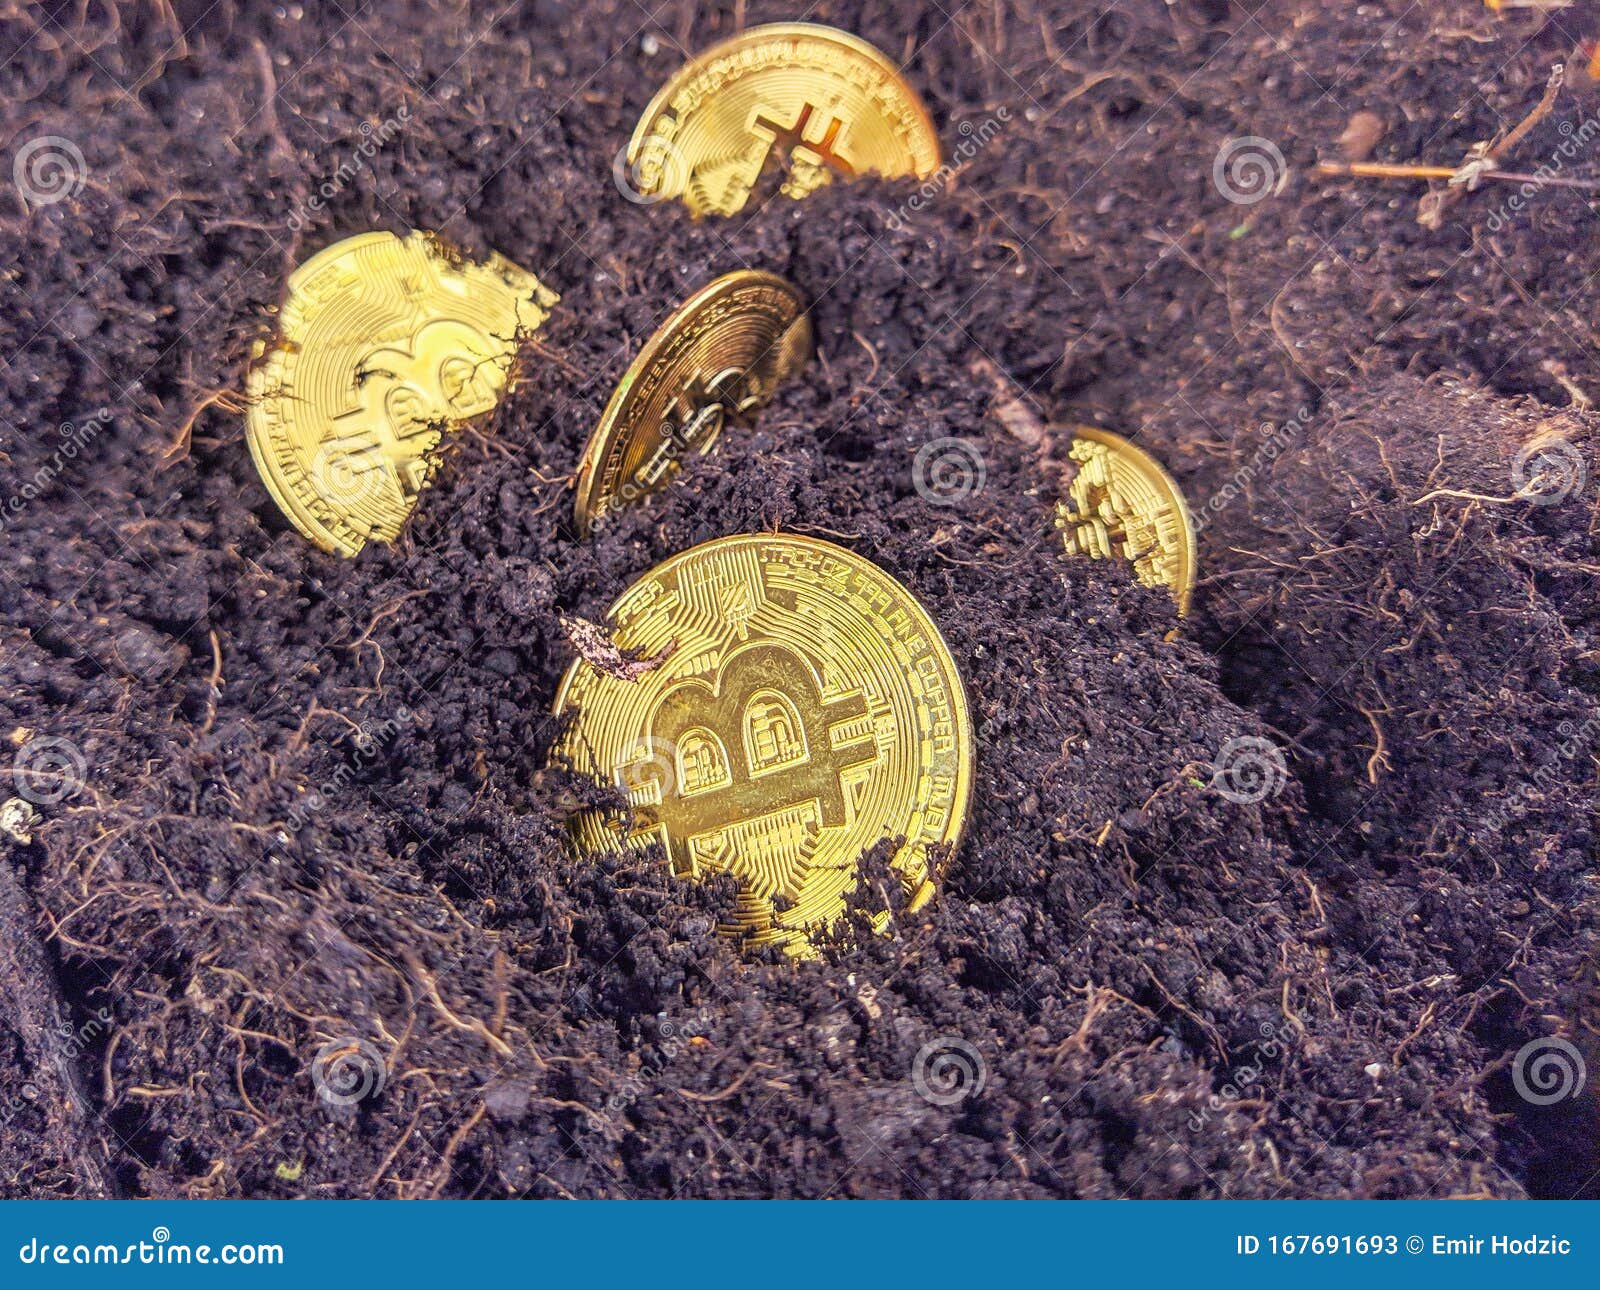 Future Currency Based On Blockchain Technology Presented By Golden Bitcoins In Soil As A Concept Of Mining Bitcoins And Investing Stock Image Image Of Bitcoin Business 167691693